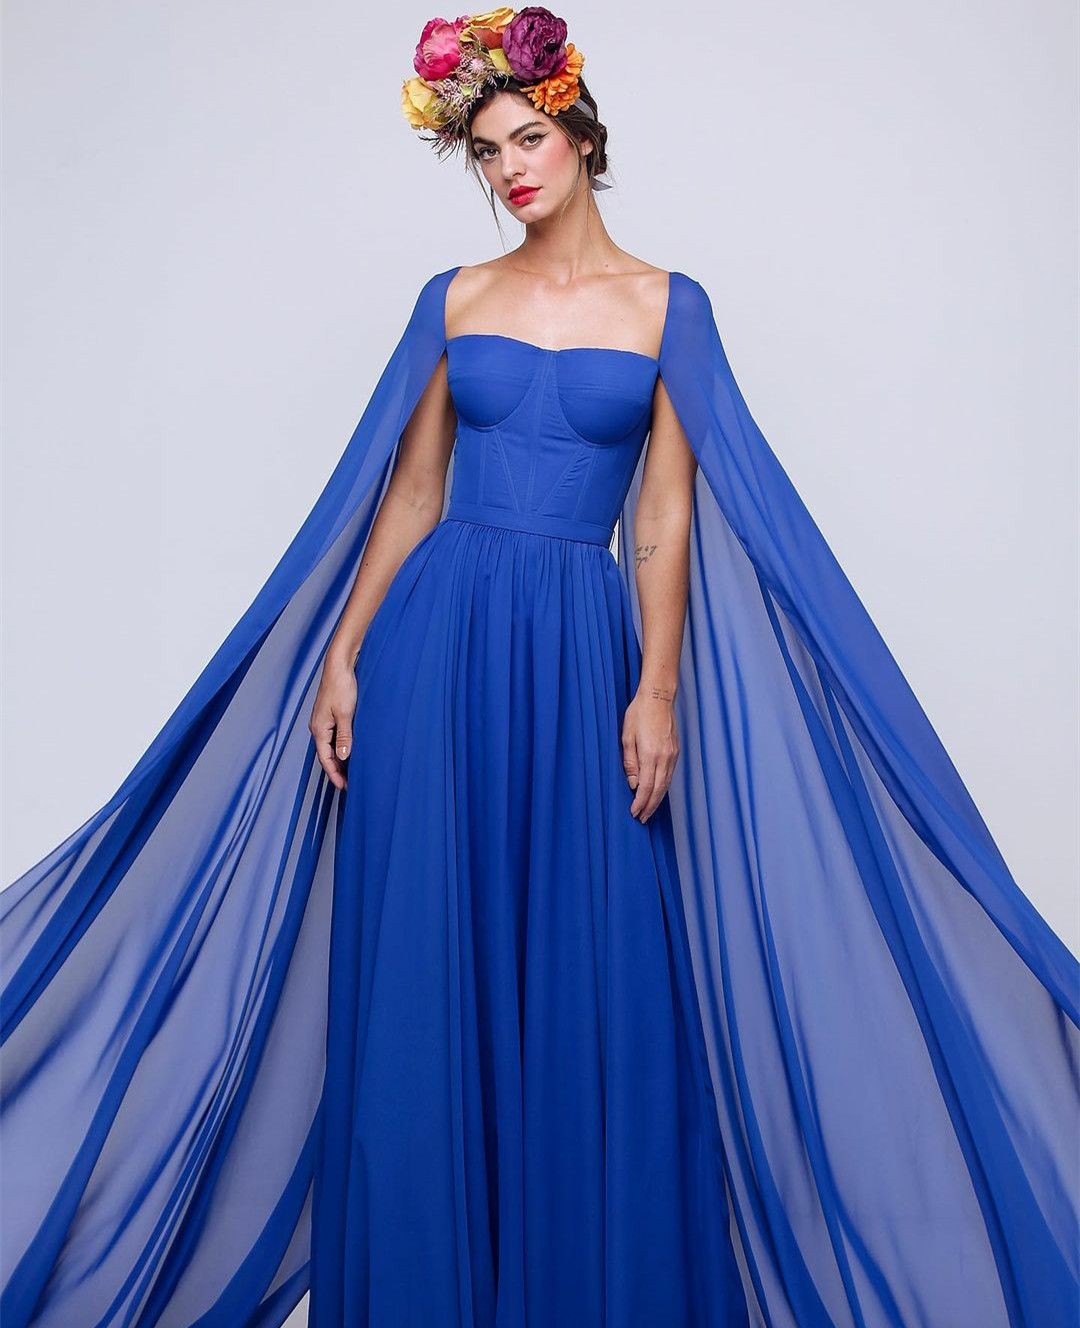 Elegant Long Royal Blue Chiffon Prom Dresses With Cape Custom A-Line Floor Length Strapless Party Dress Maxi Pleated Evening Dresses for Women